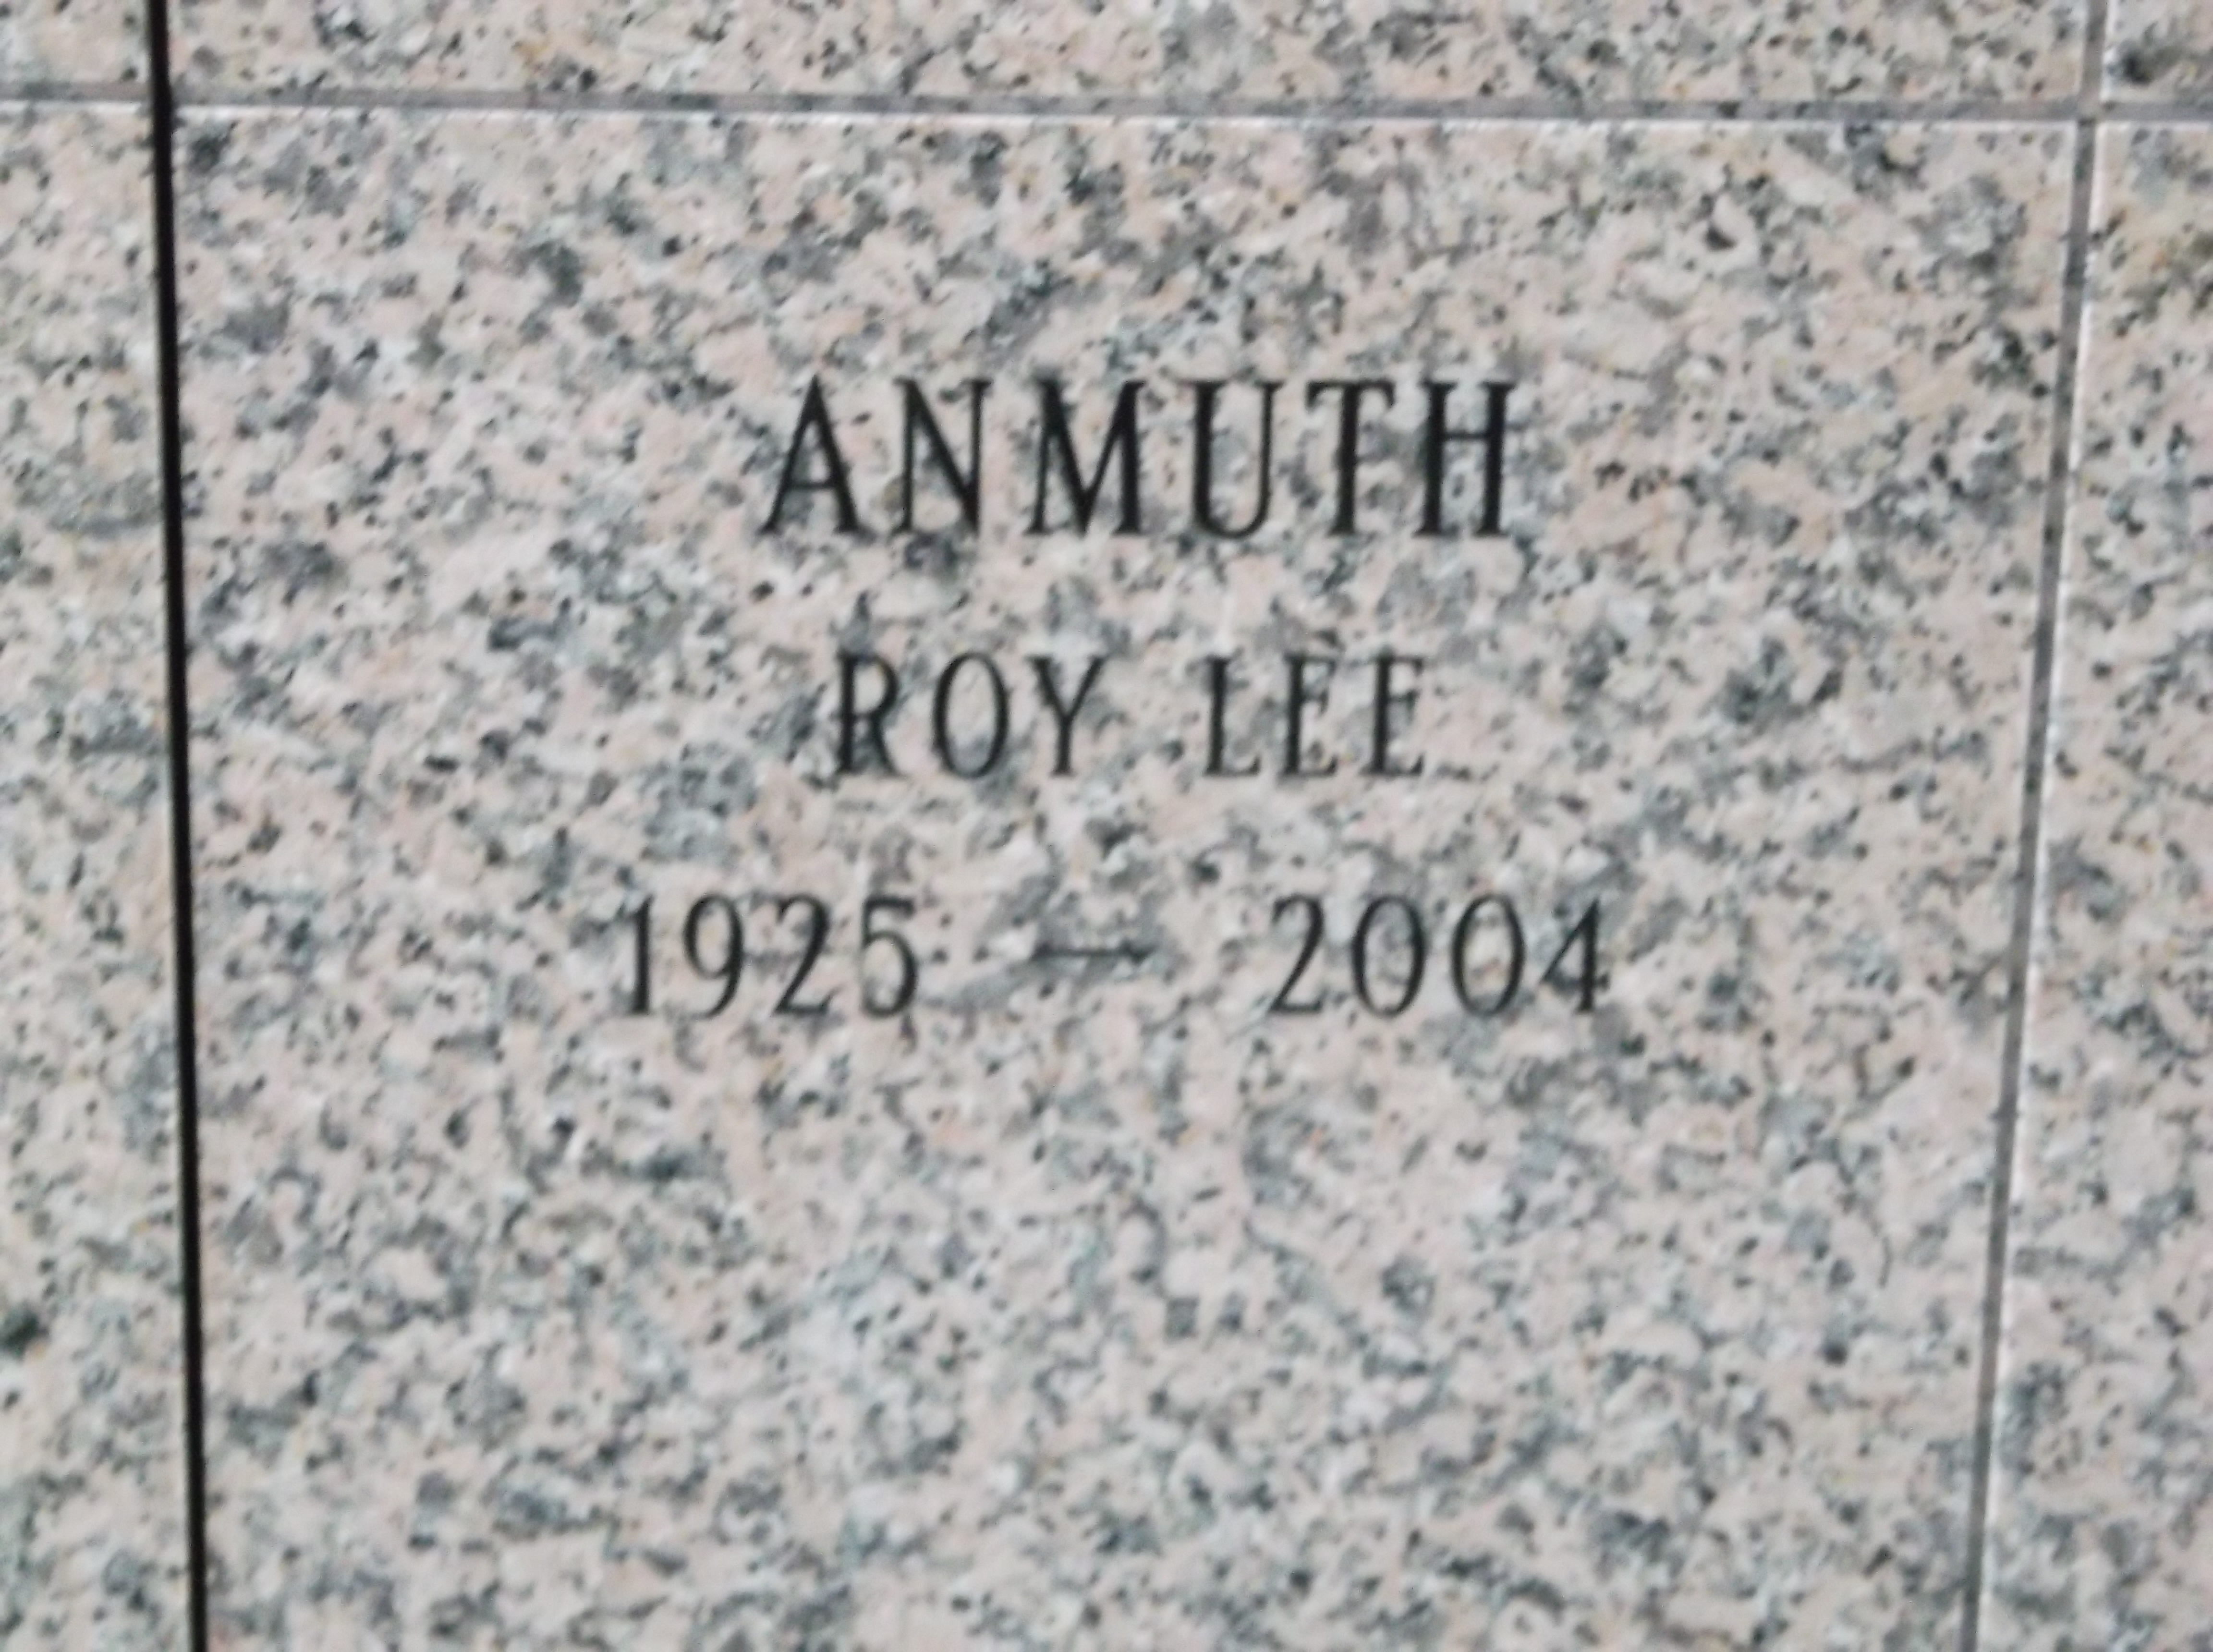 Roy Lee Anmuth